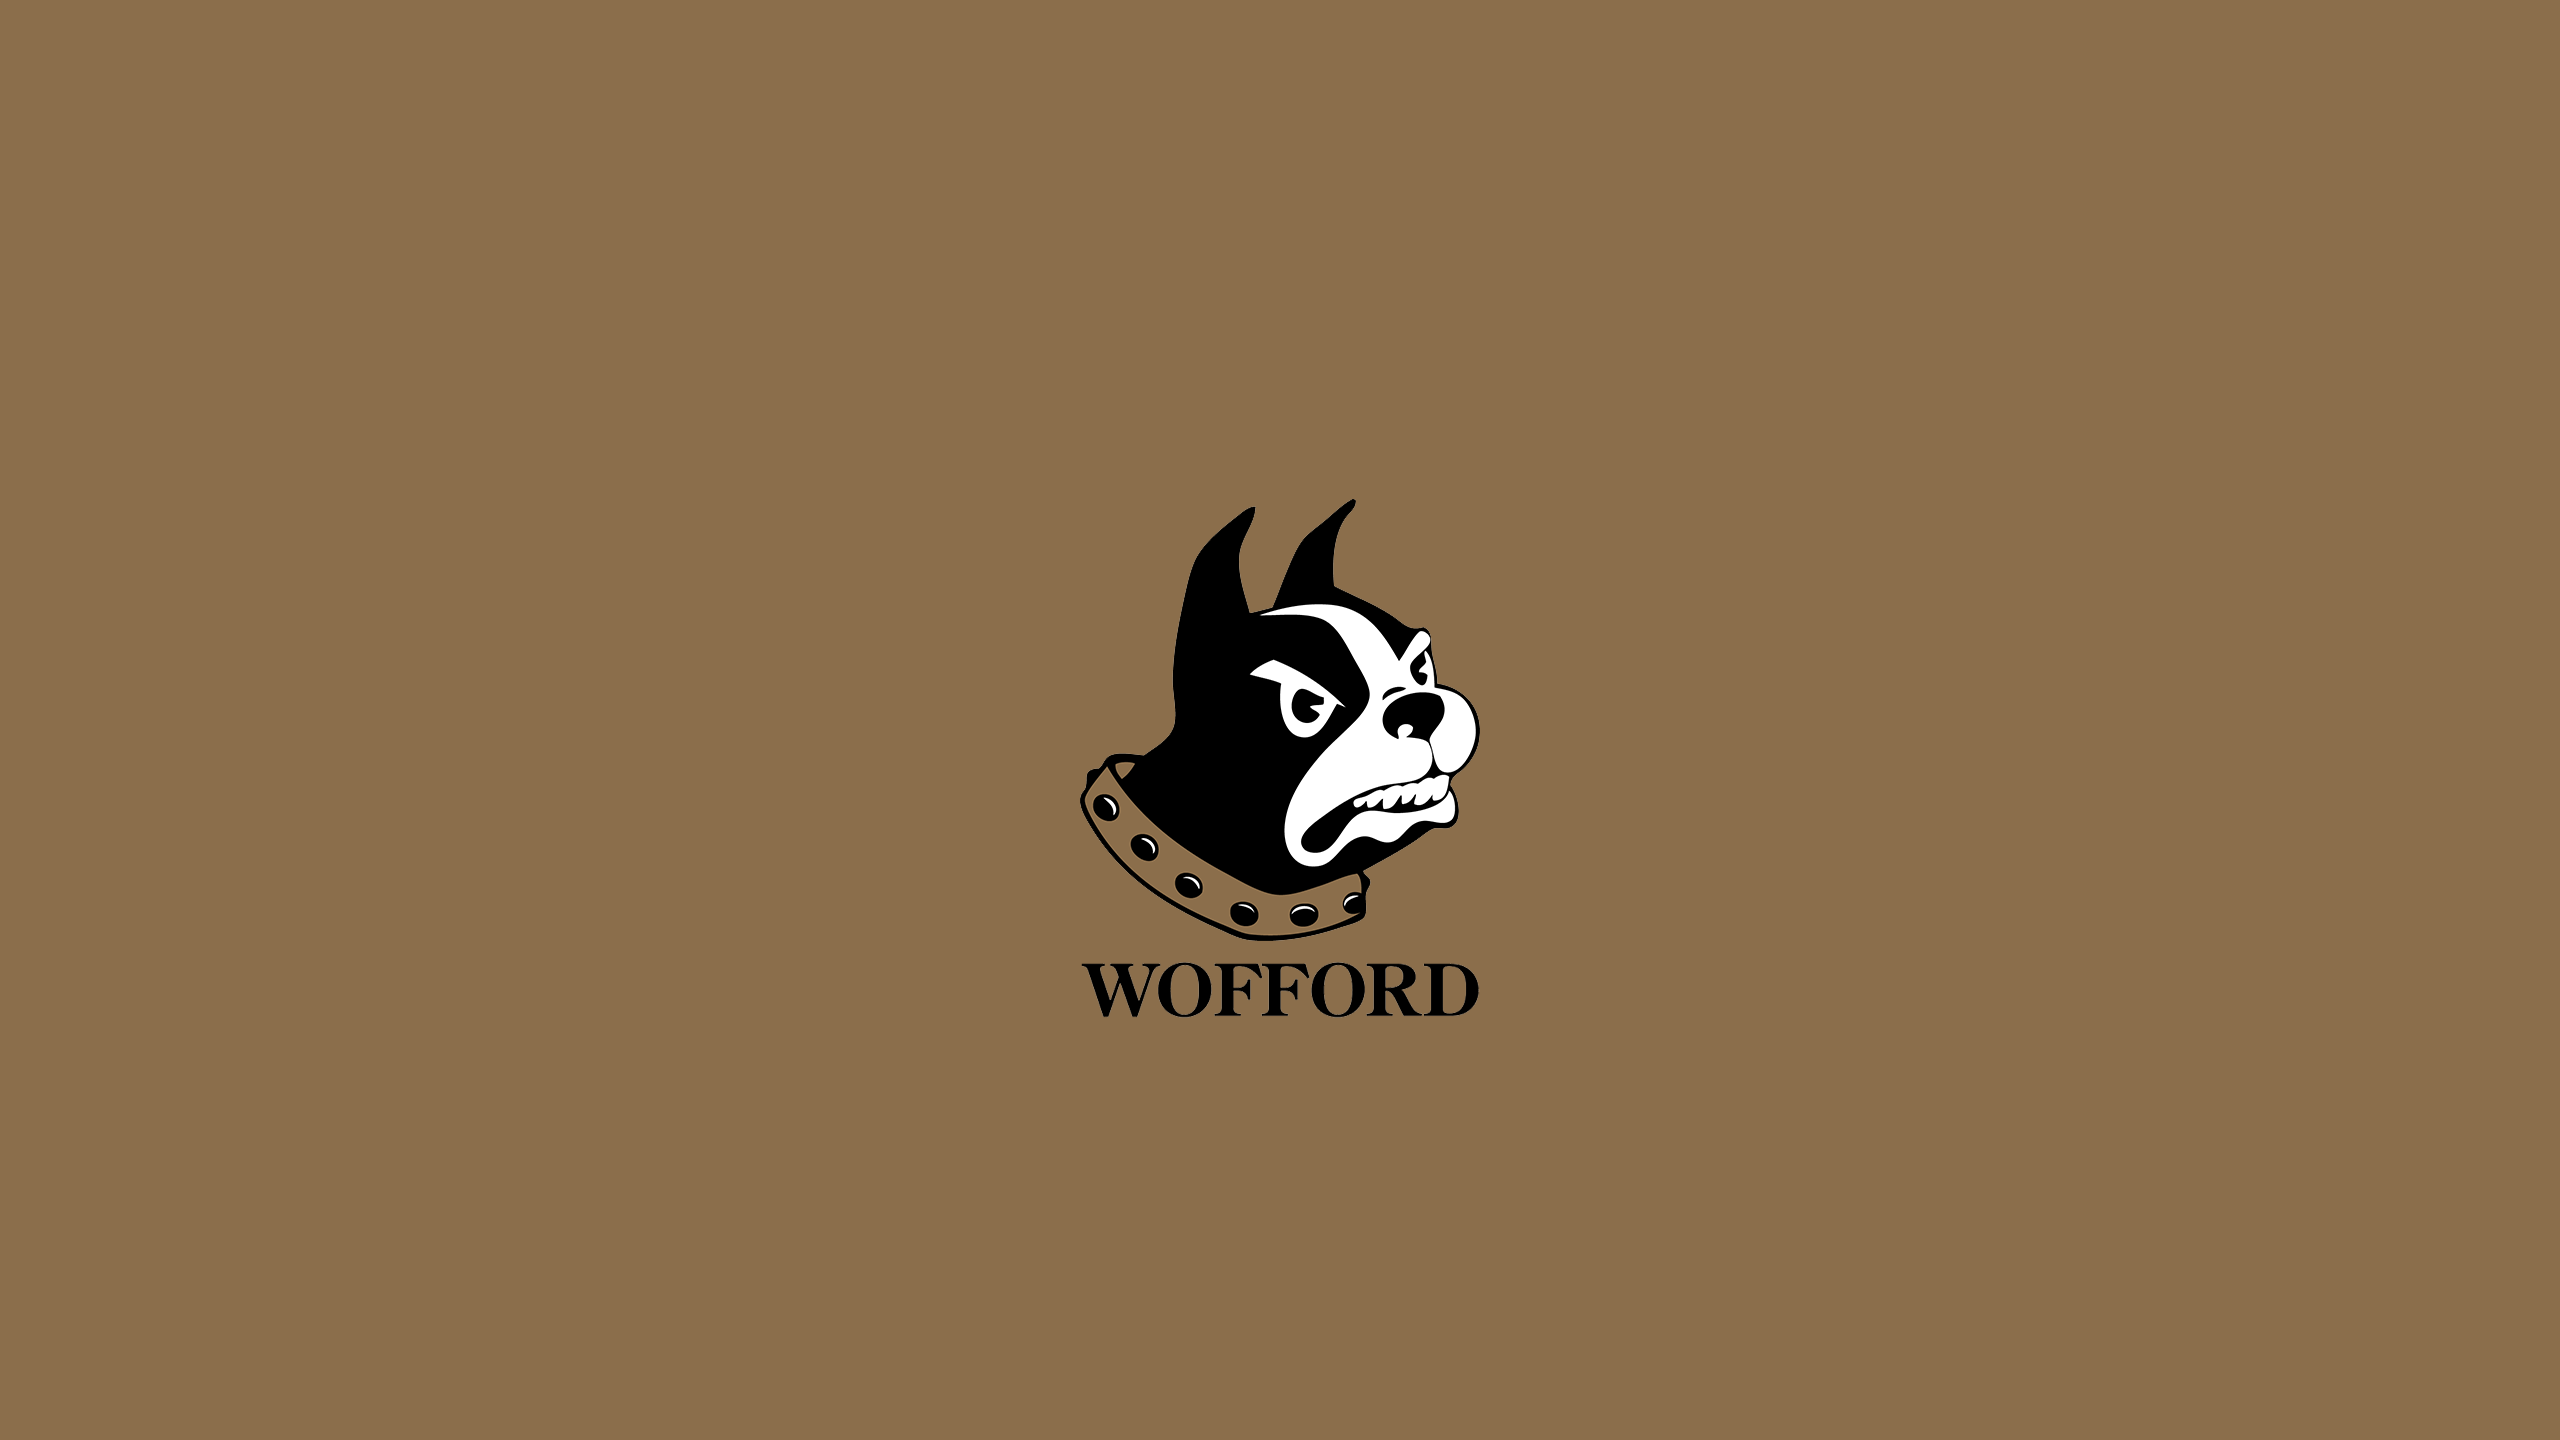 Wofford Terriers Basketball - NCAAB - Square Bettor